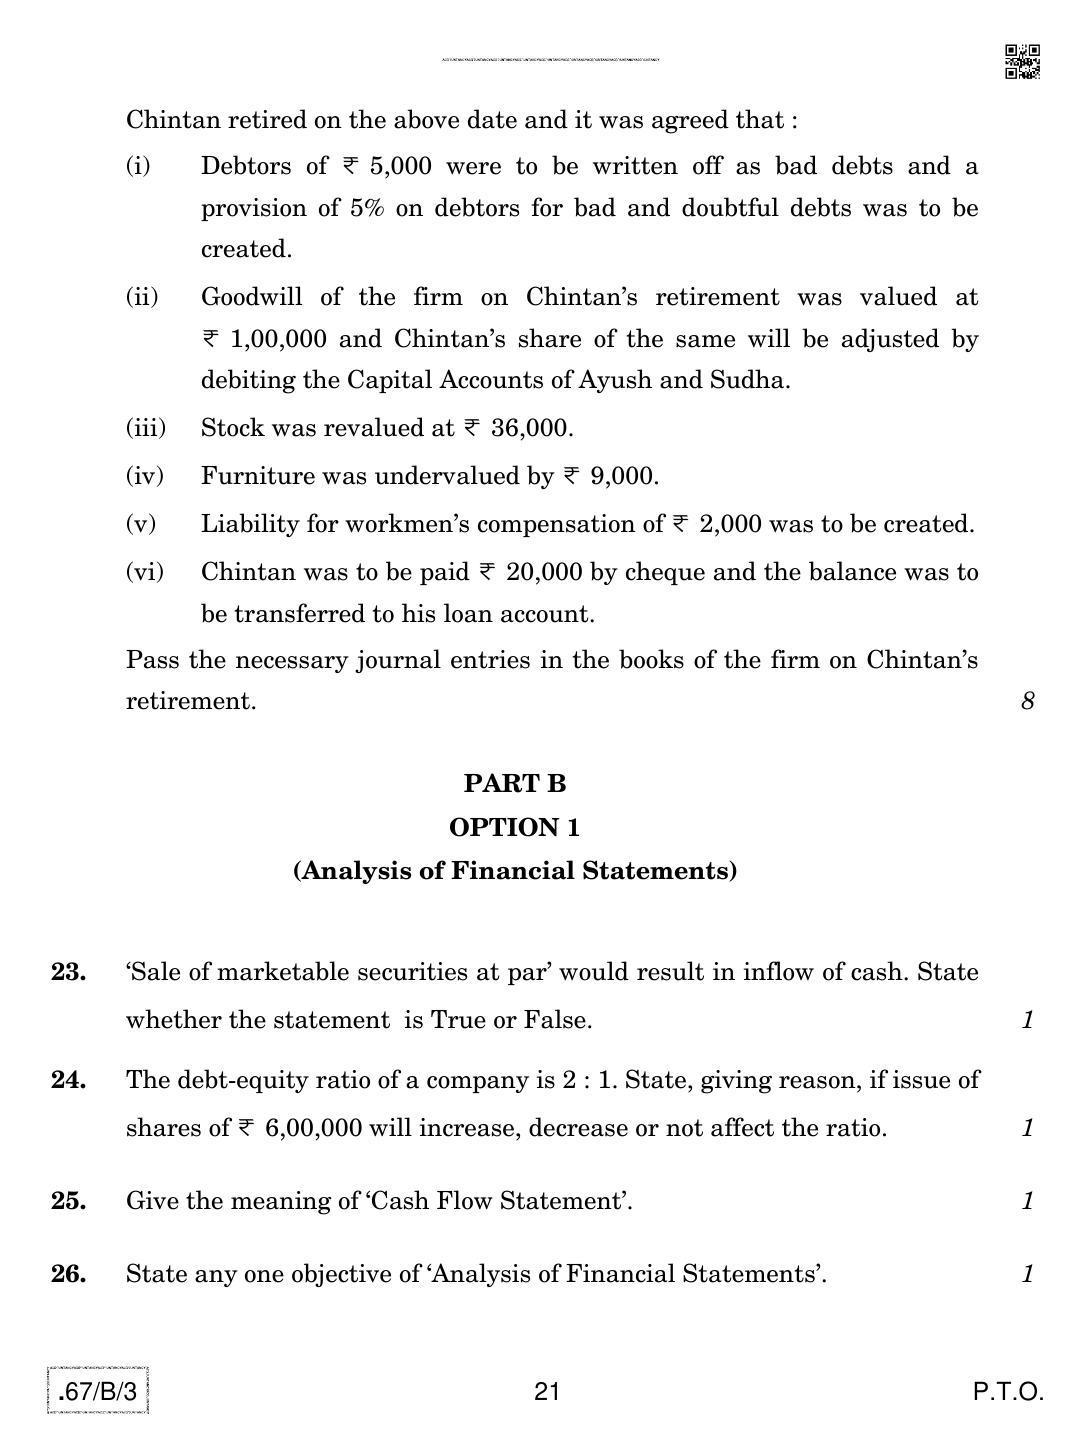 CBSE Class 12 67-C-3 - Accountancy 2020 Compartment Question Paper - Page 21